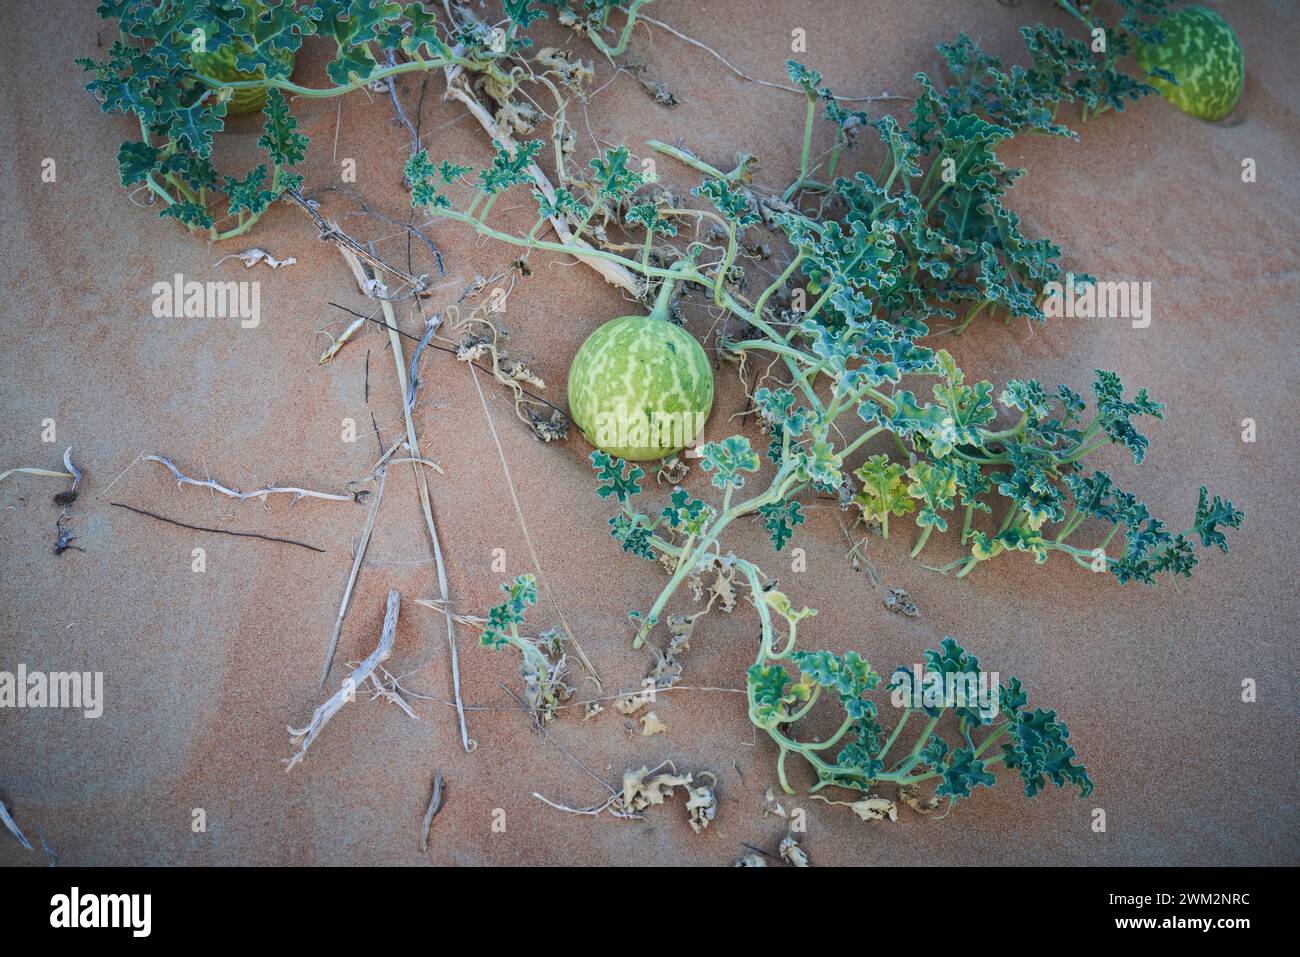 A bitter apple, or colocynth, Latin name Citrullus colocynthis in the desert near Dubai, United Arab Emirates Stock Photo